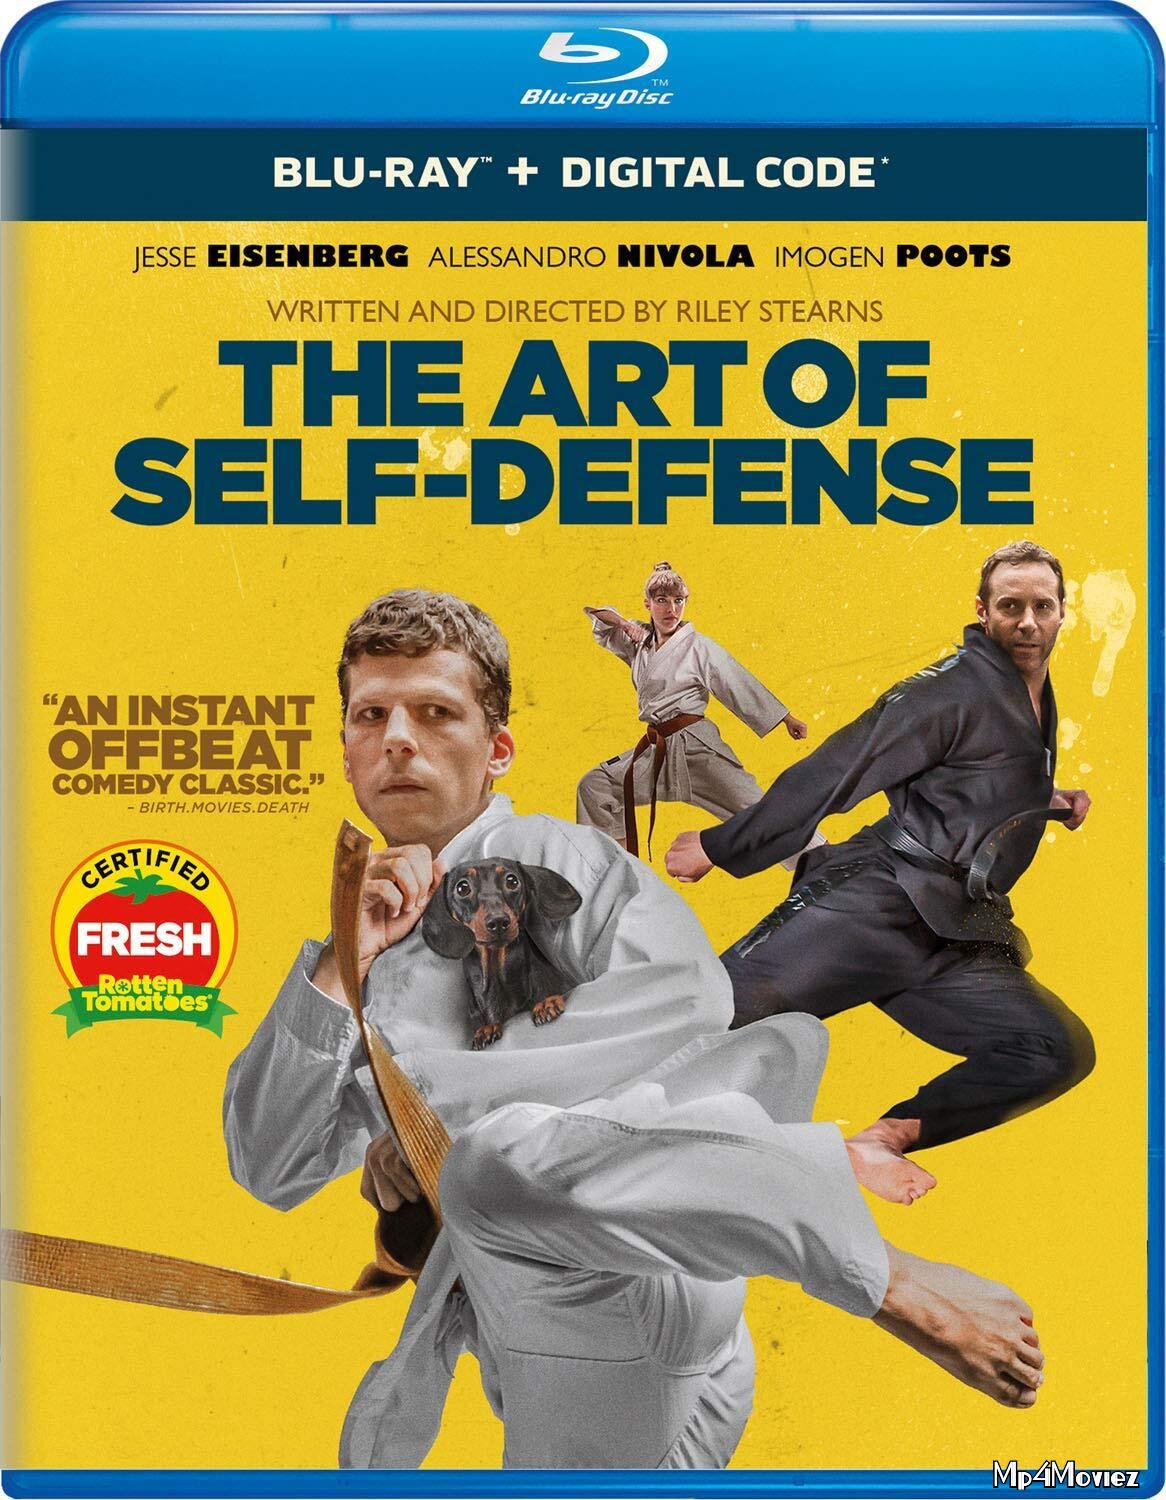 Download The Art Of Self Defense 2019 Full Hd Quality